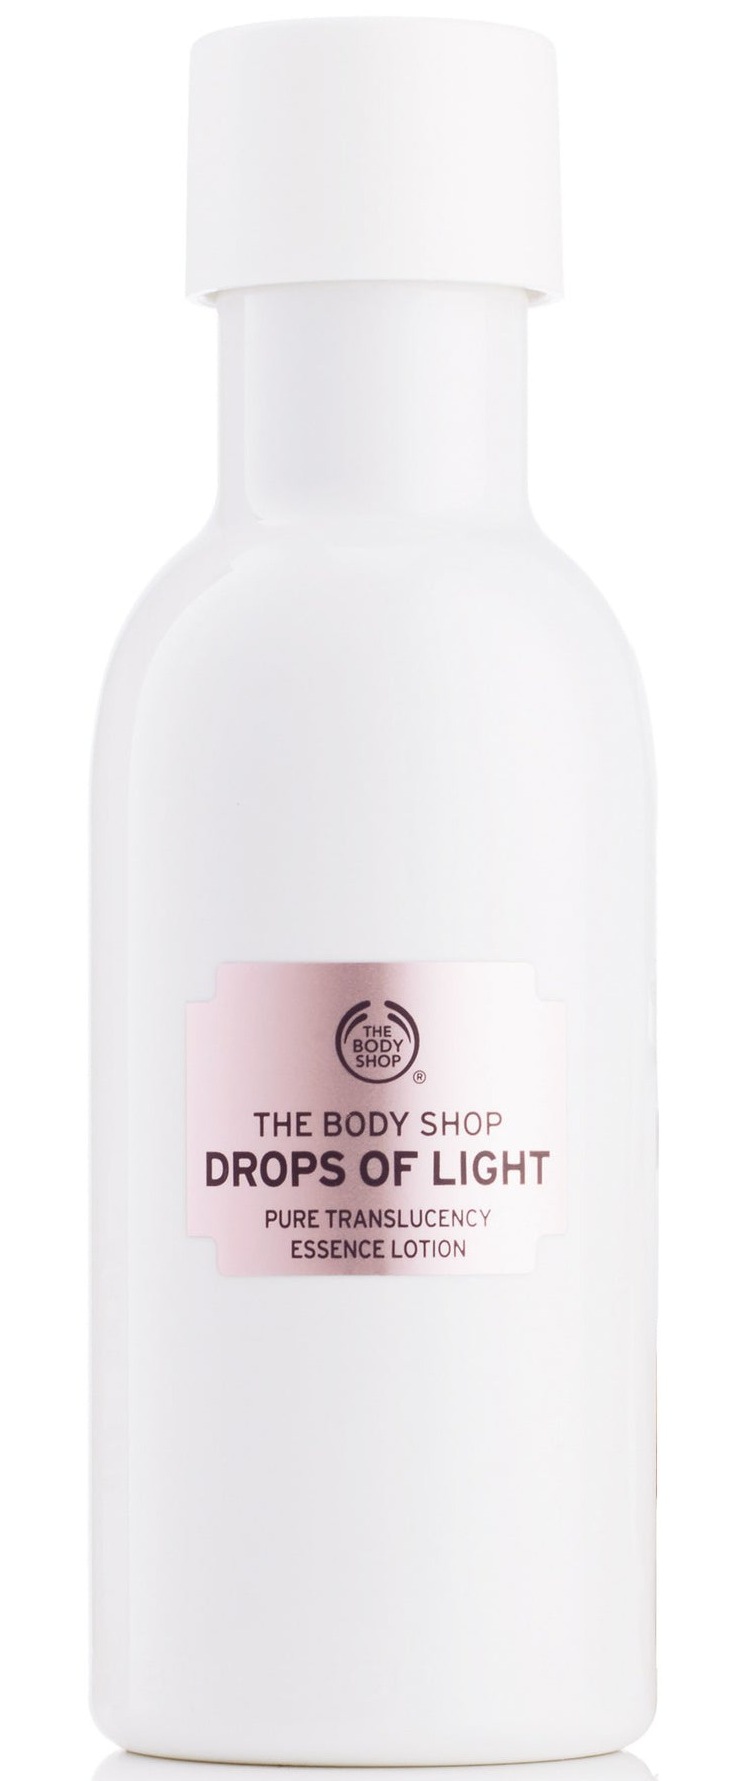 The Body Shop Drops Of Light Brightening Essence Lotion